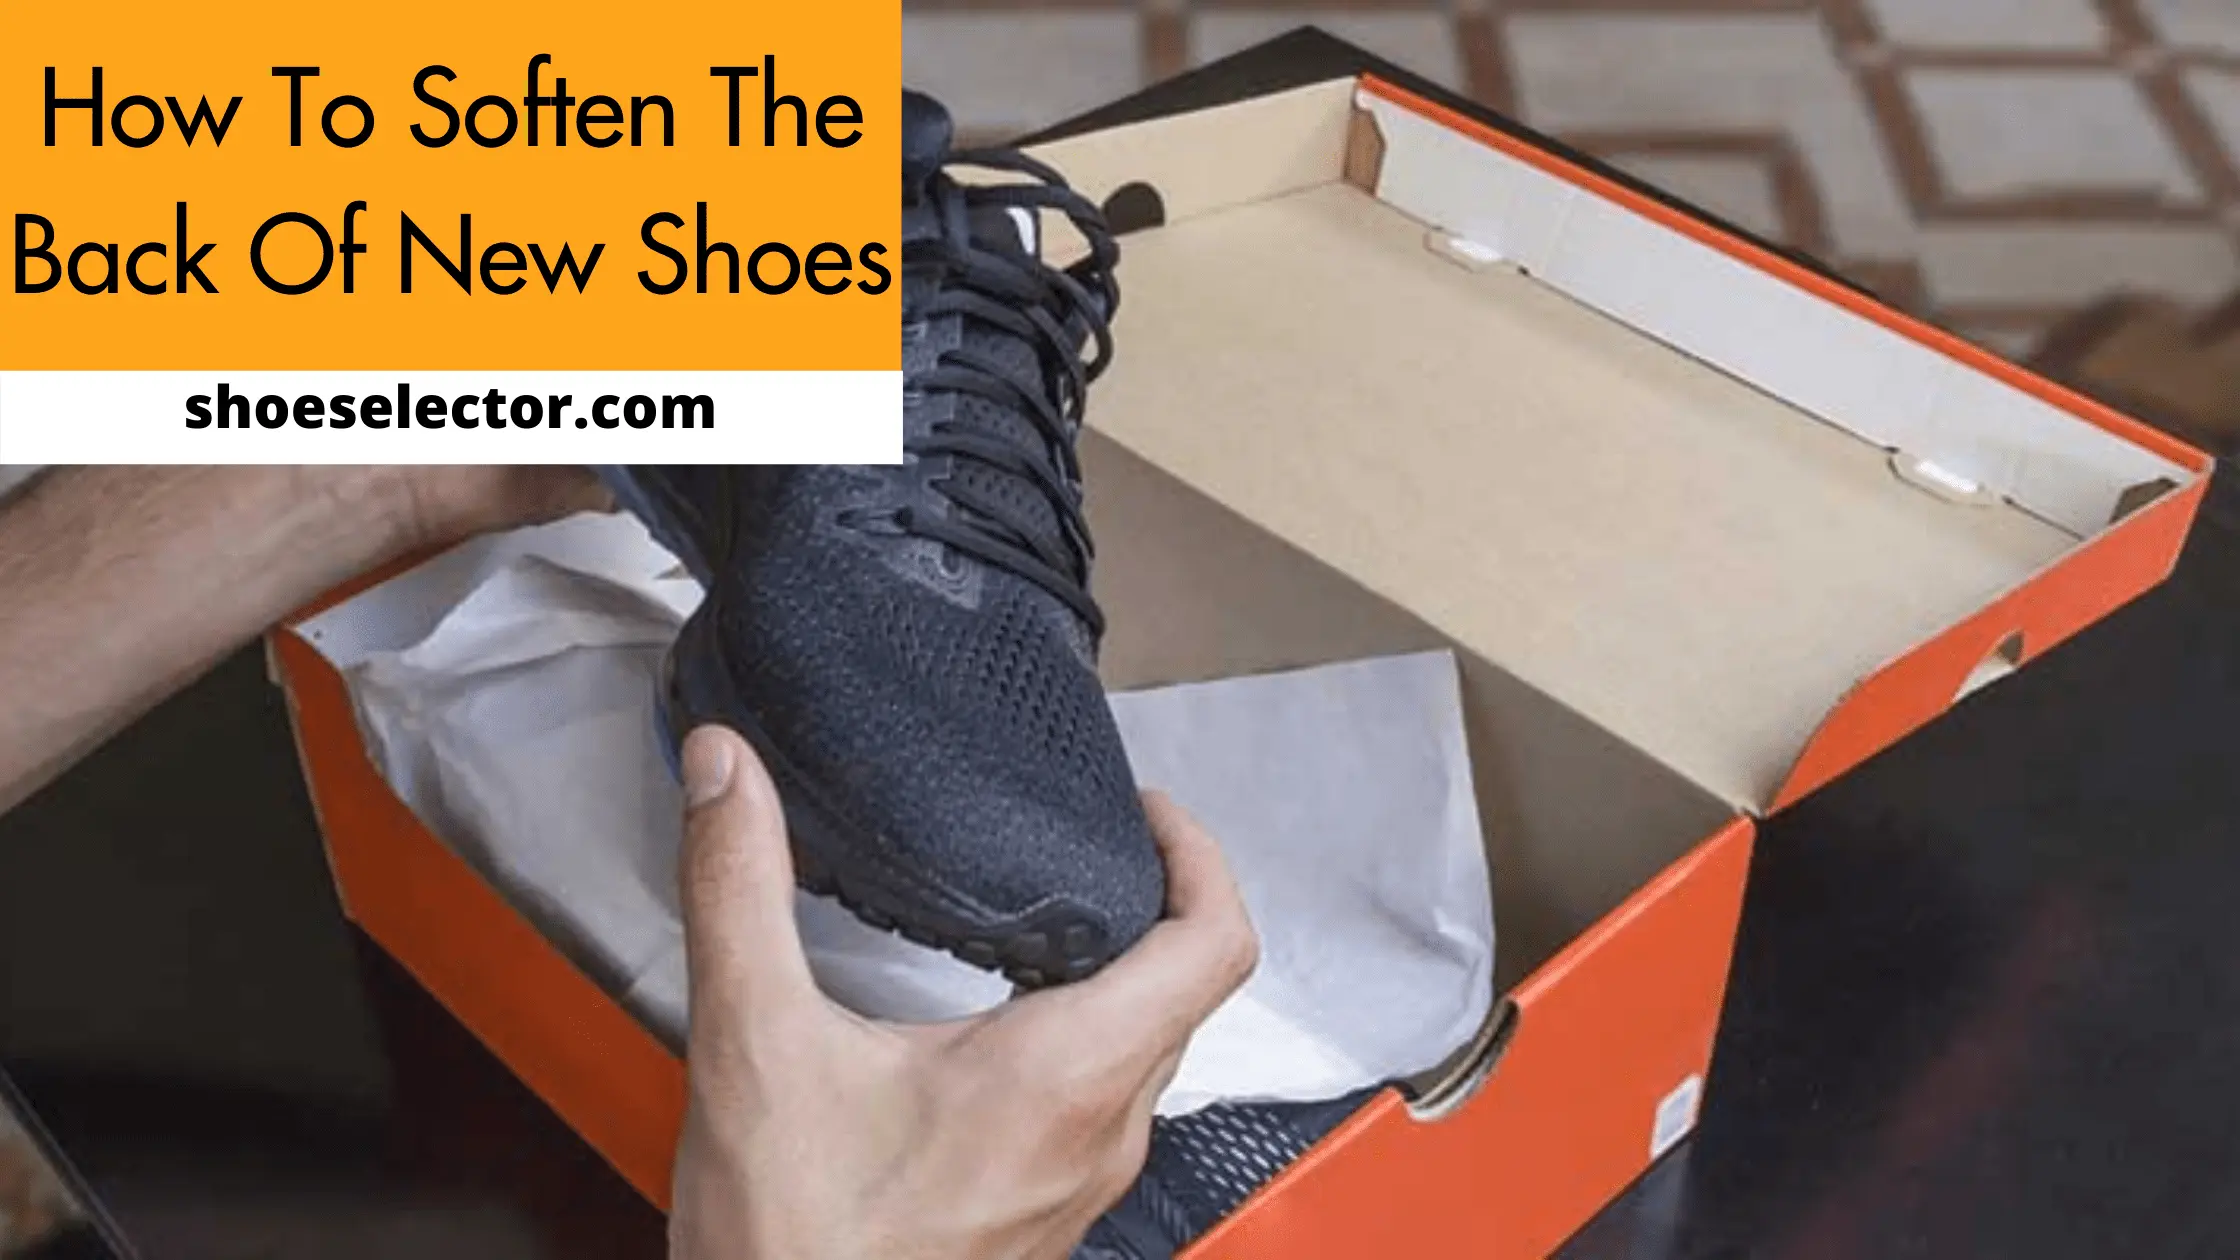 How To Soften The Back Of New Shoes? Easy Ways